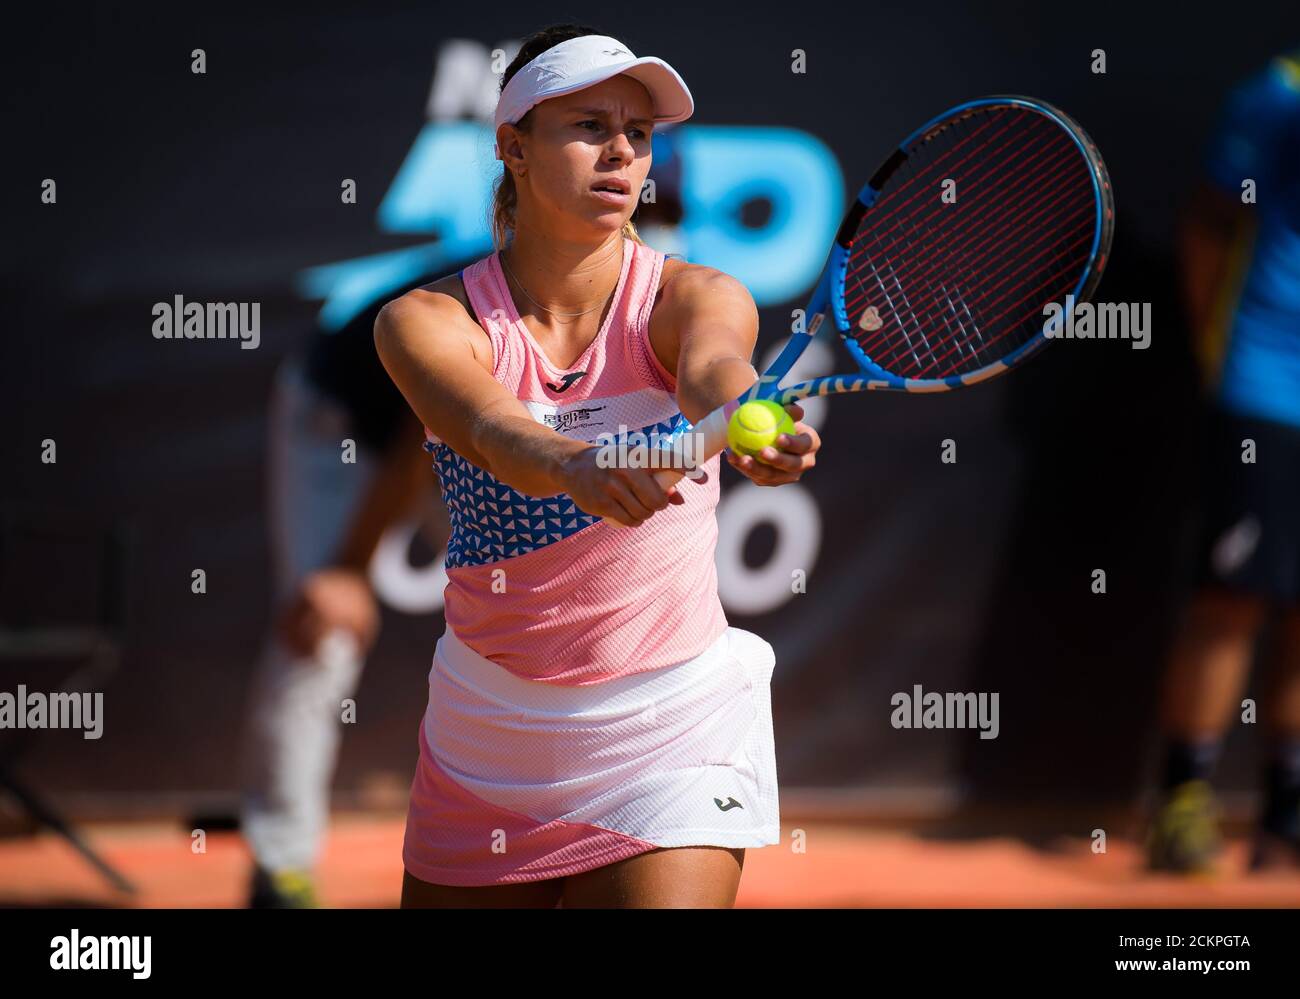 Rome, Italy. 16th Sep, 2020. Magda Linette of Poland in action during her  second-round match at the 2020 Internazionali BNL d'Italia WTA Premier 5  tennis tournament on September 16, 2020 at Foro